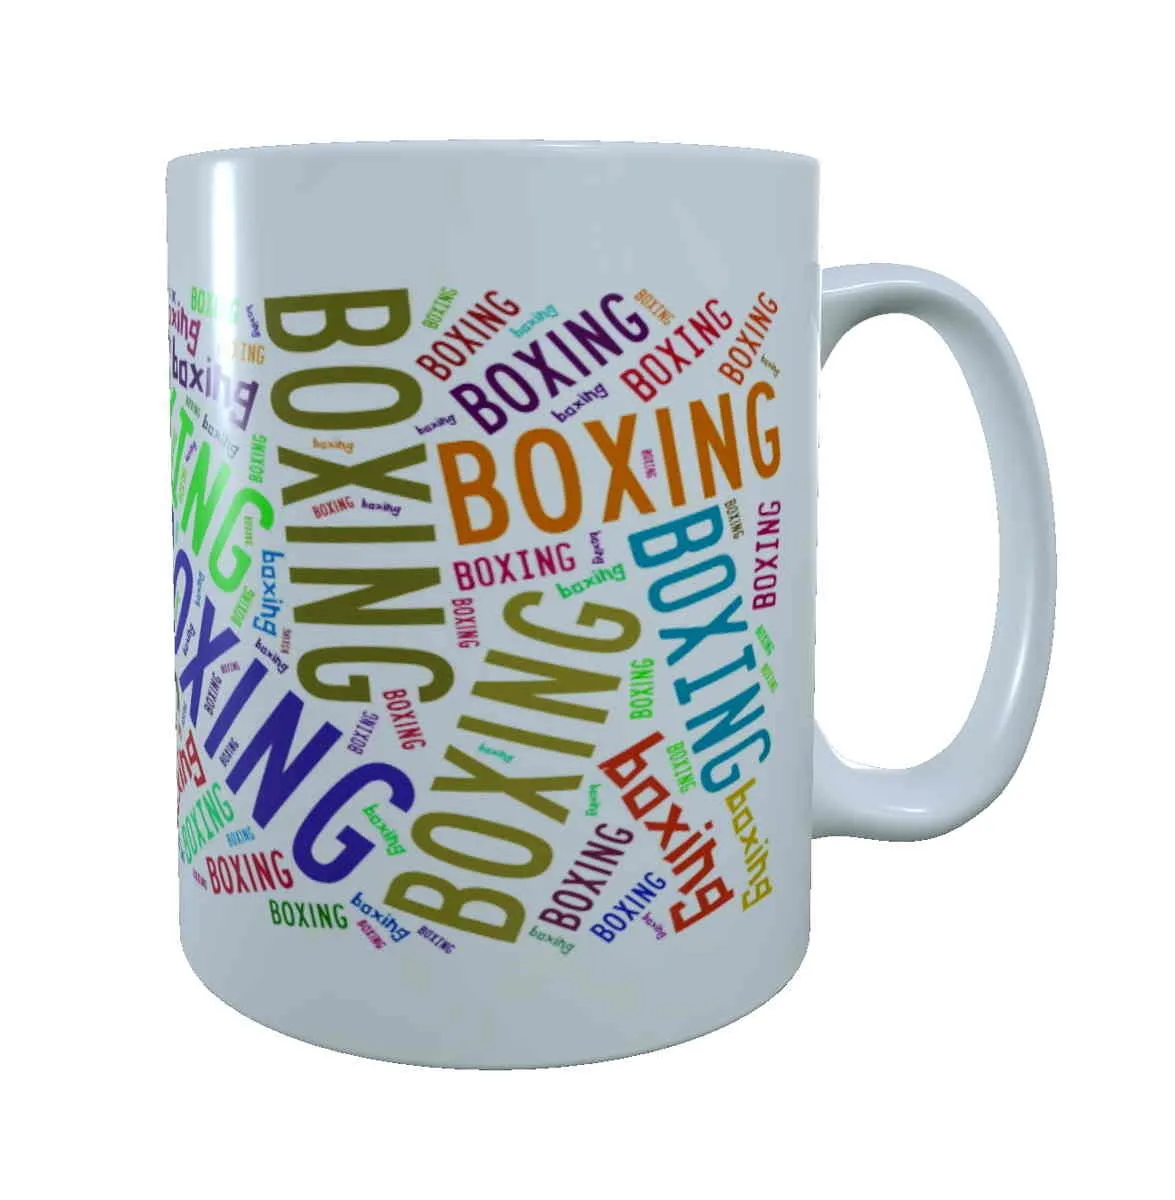 Mug white printed with boxing colourful